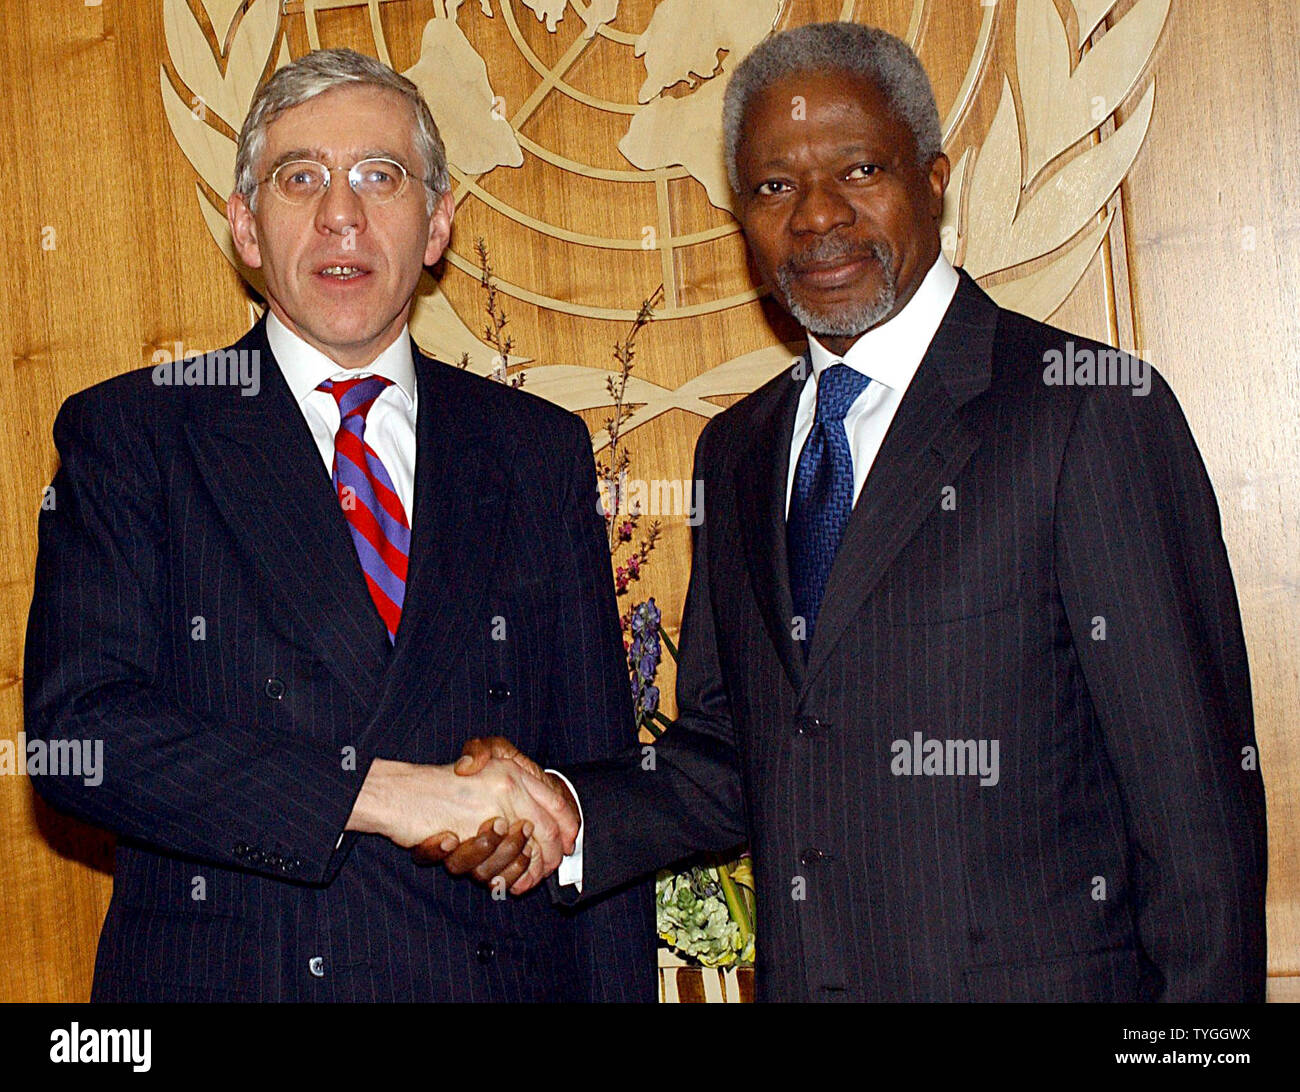 Jack Straw, Secretary of State for Foreign Affairs of the United Kingdom and  United Nations Secretary General Kofi Annan, R,are  shown in a March 2003 file photo. Clare Short former International Development Secretary announced on Feb. 26, 2004 that Britain conducted spying operations on Kofi Annan in the run up to last years war on Iraq. (UPI/Ezio Petersen) Stock Photo